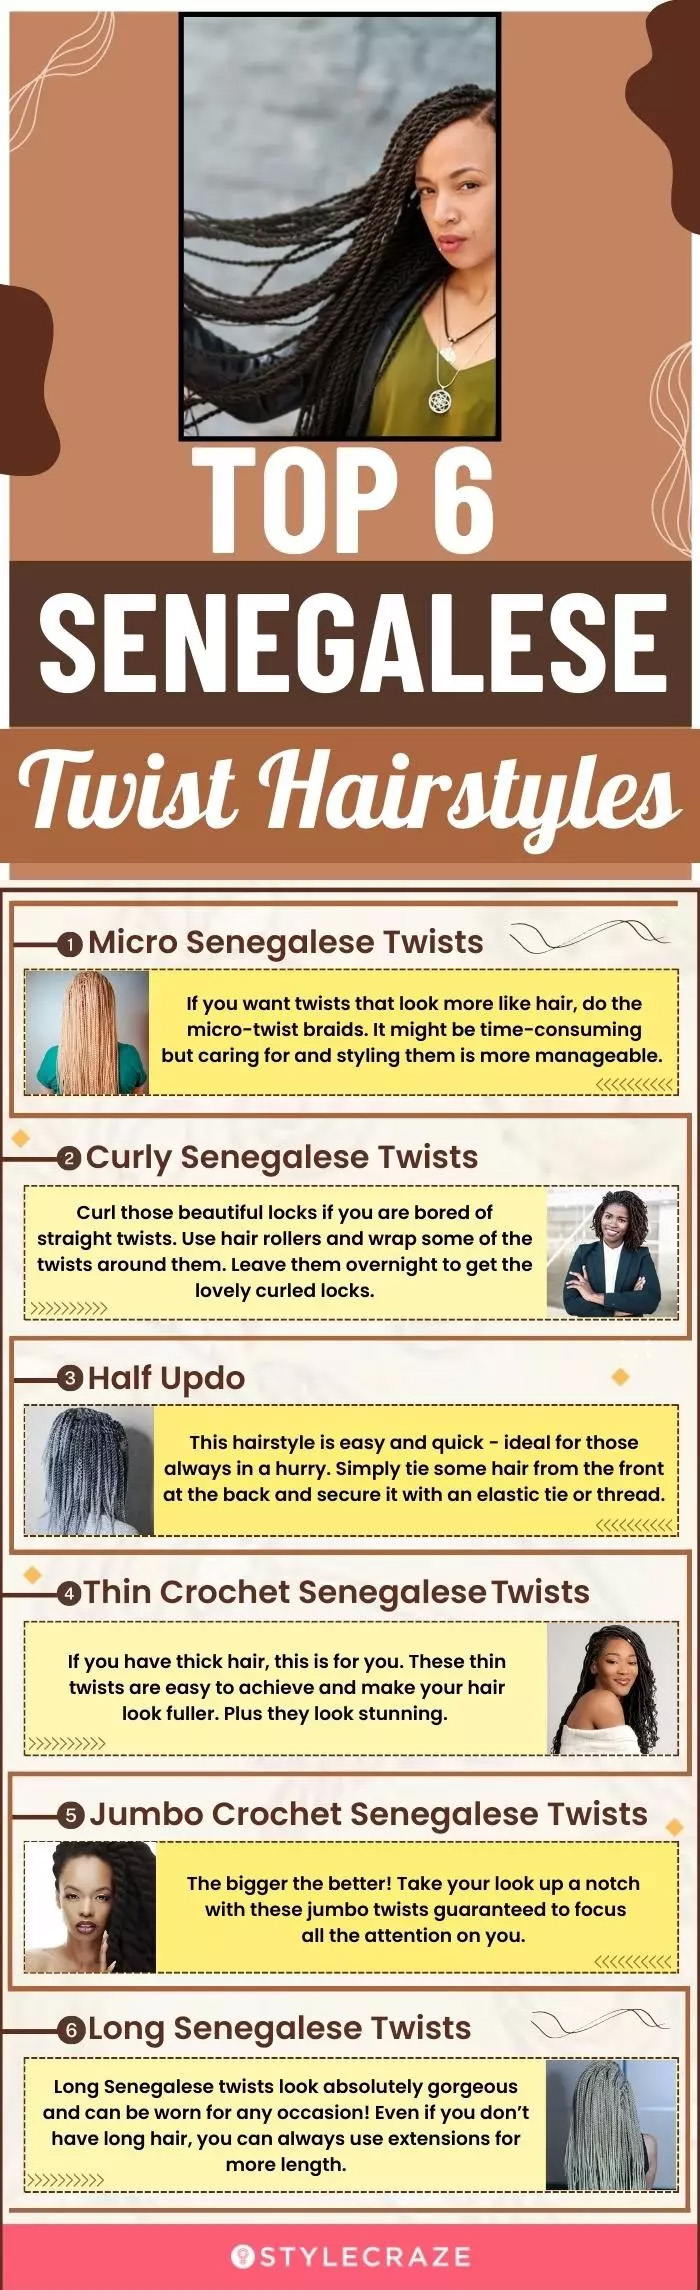 top 6 senegalese hair styles (infographic)